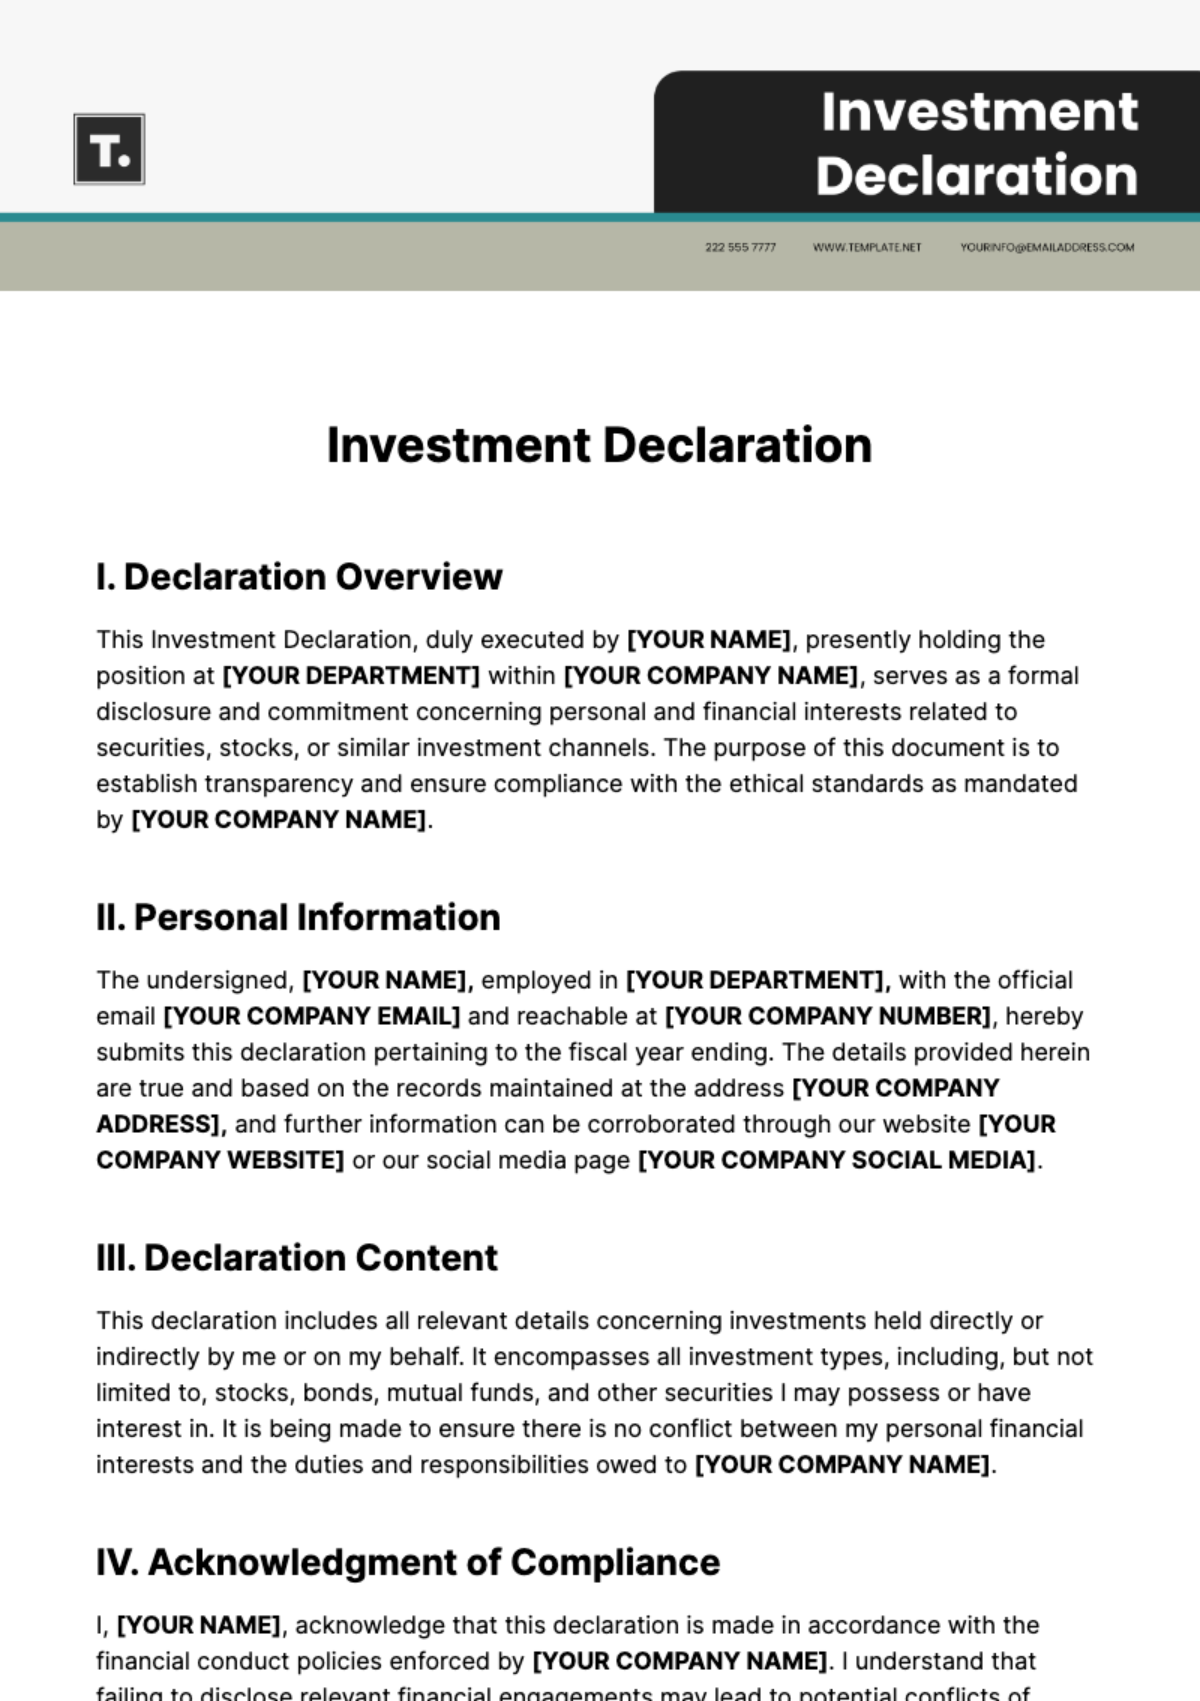 Free Investment Declaration Template